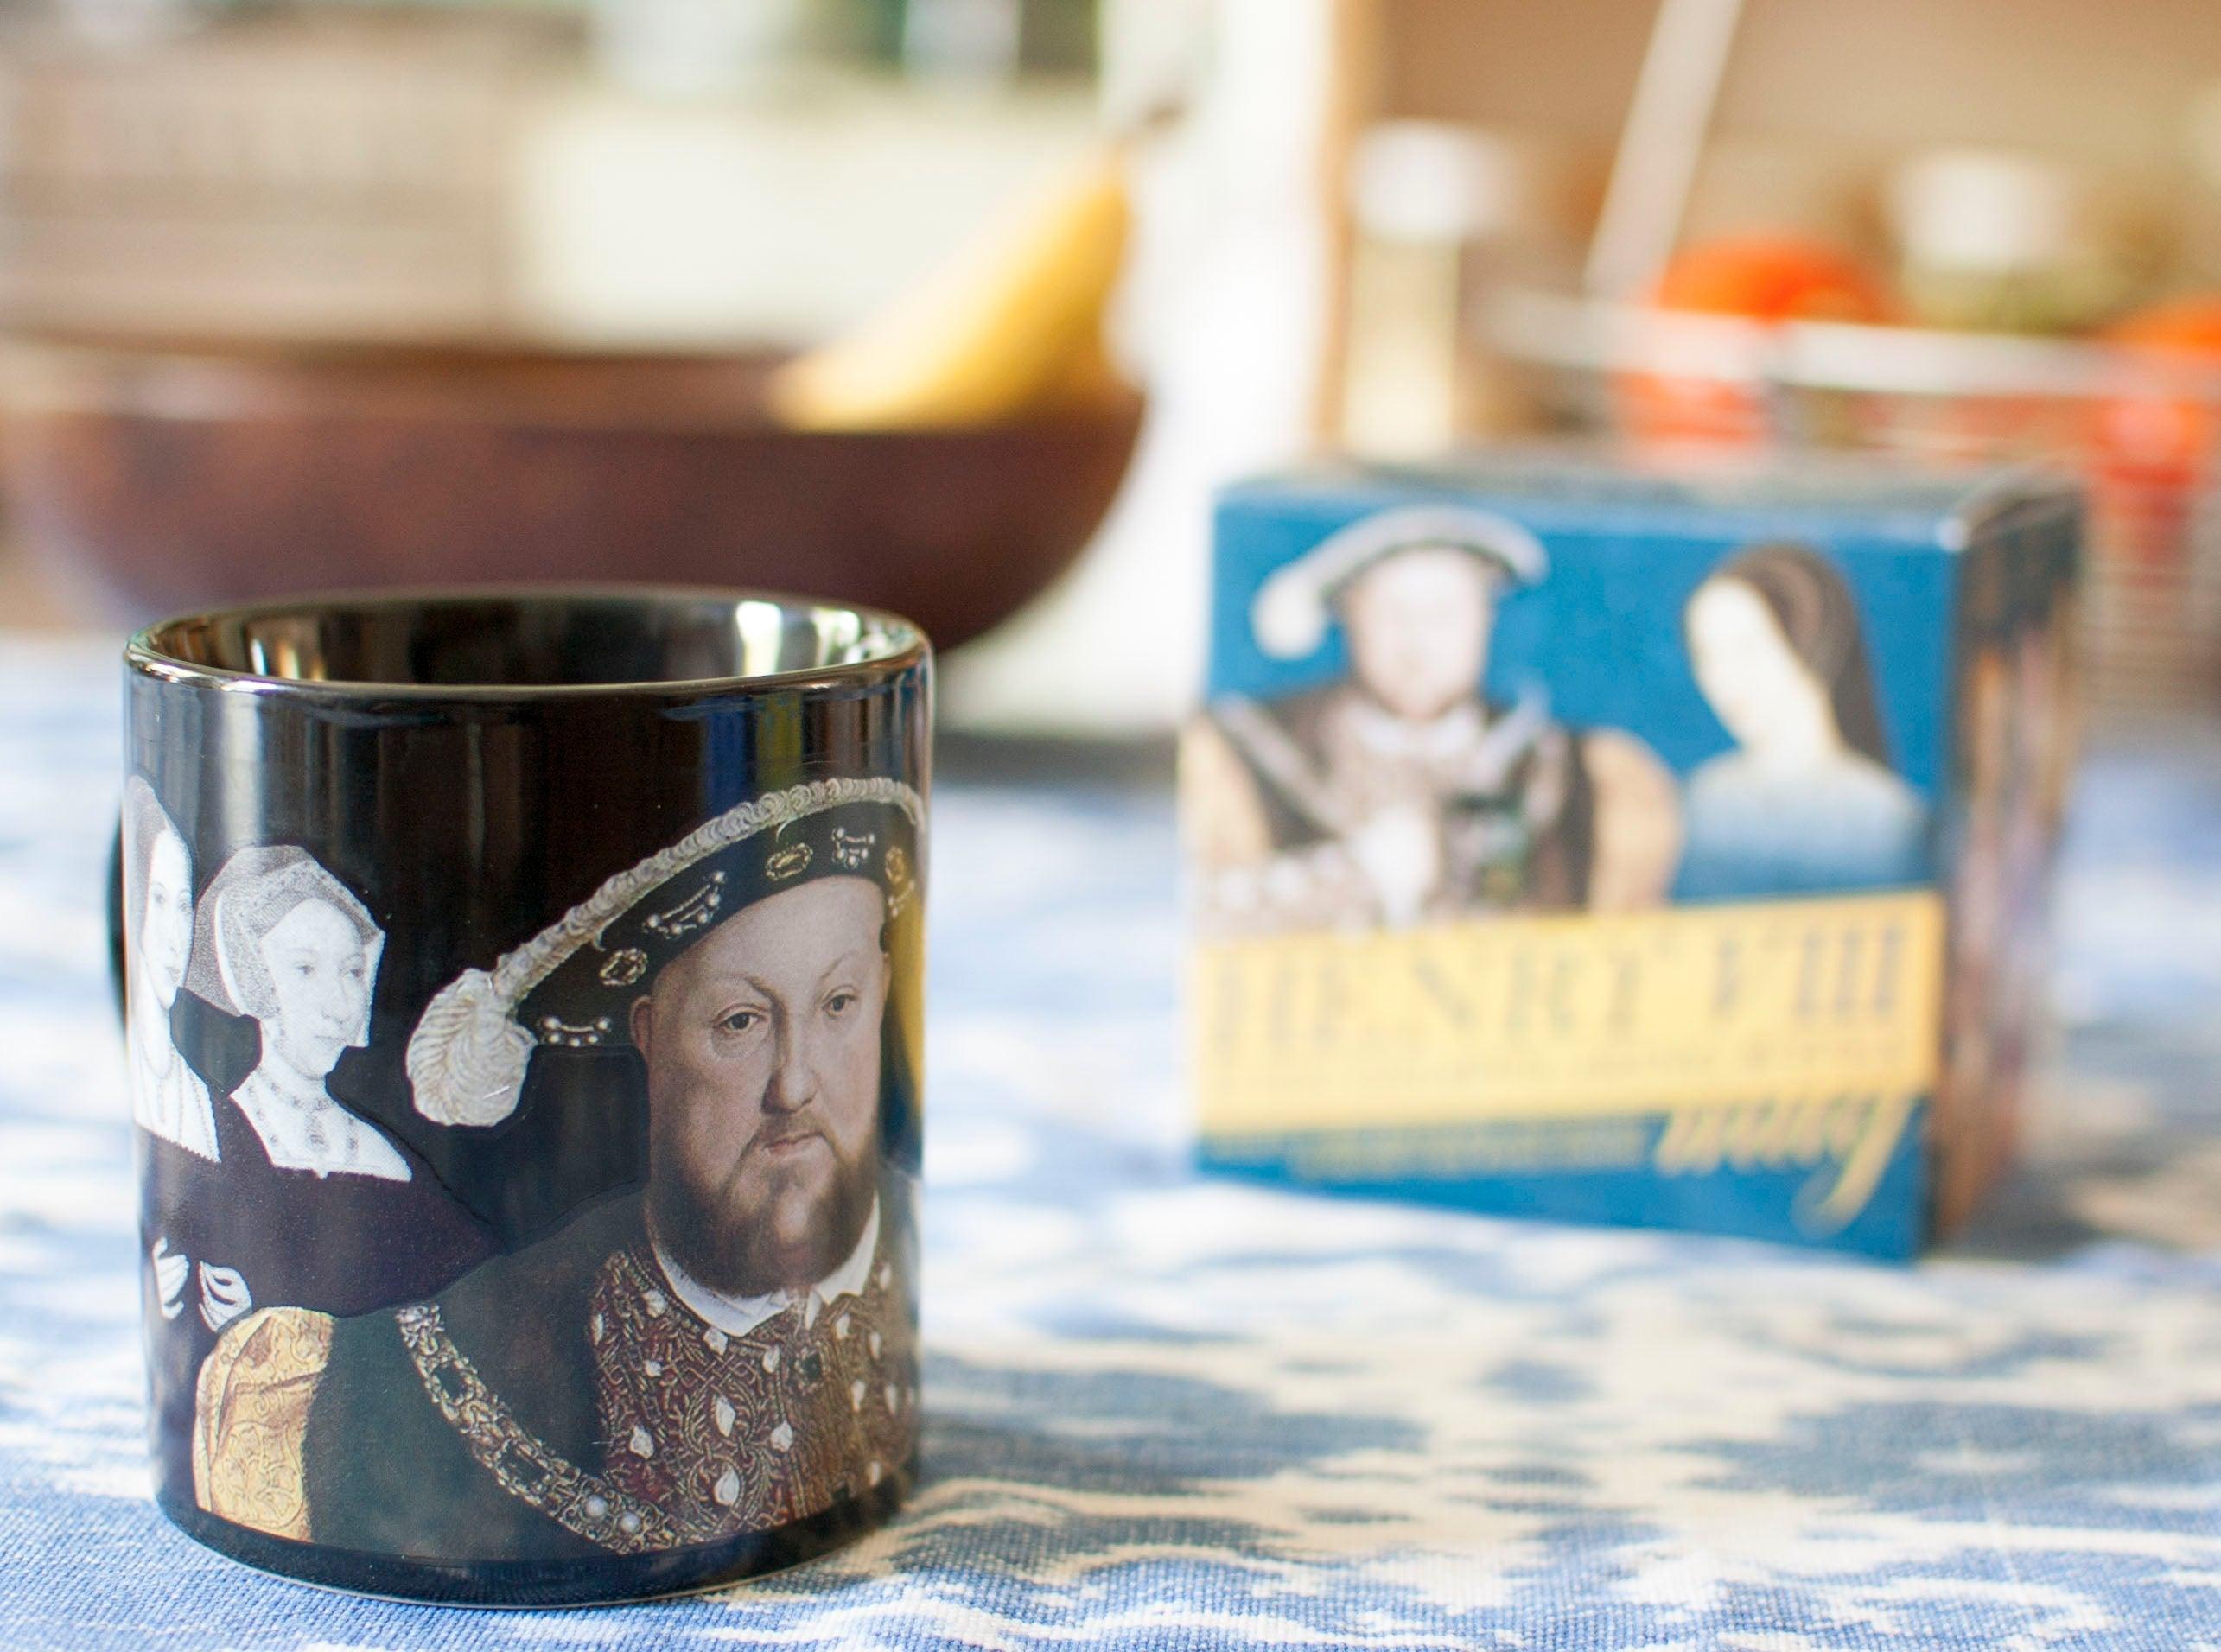 Product photo of Henry VIII Wives Heat-Changing Mug, a novelty gift manufactured by The Unemployed Philosophers Guild.